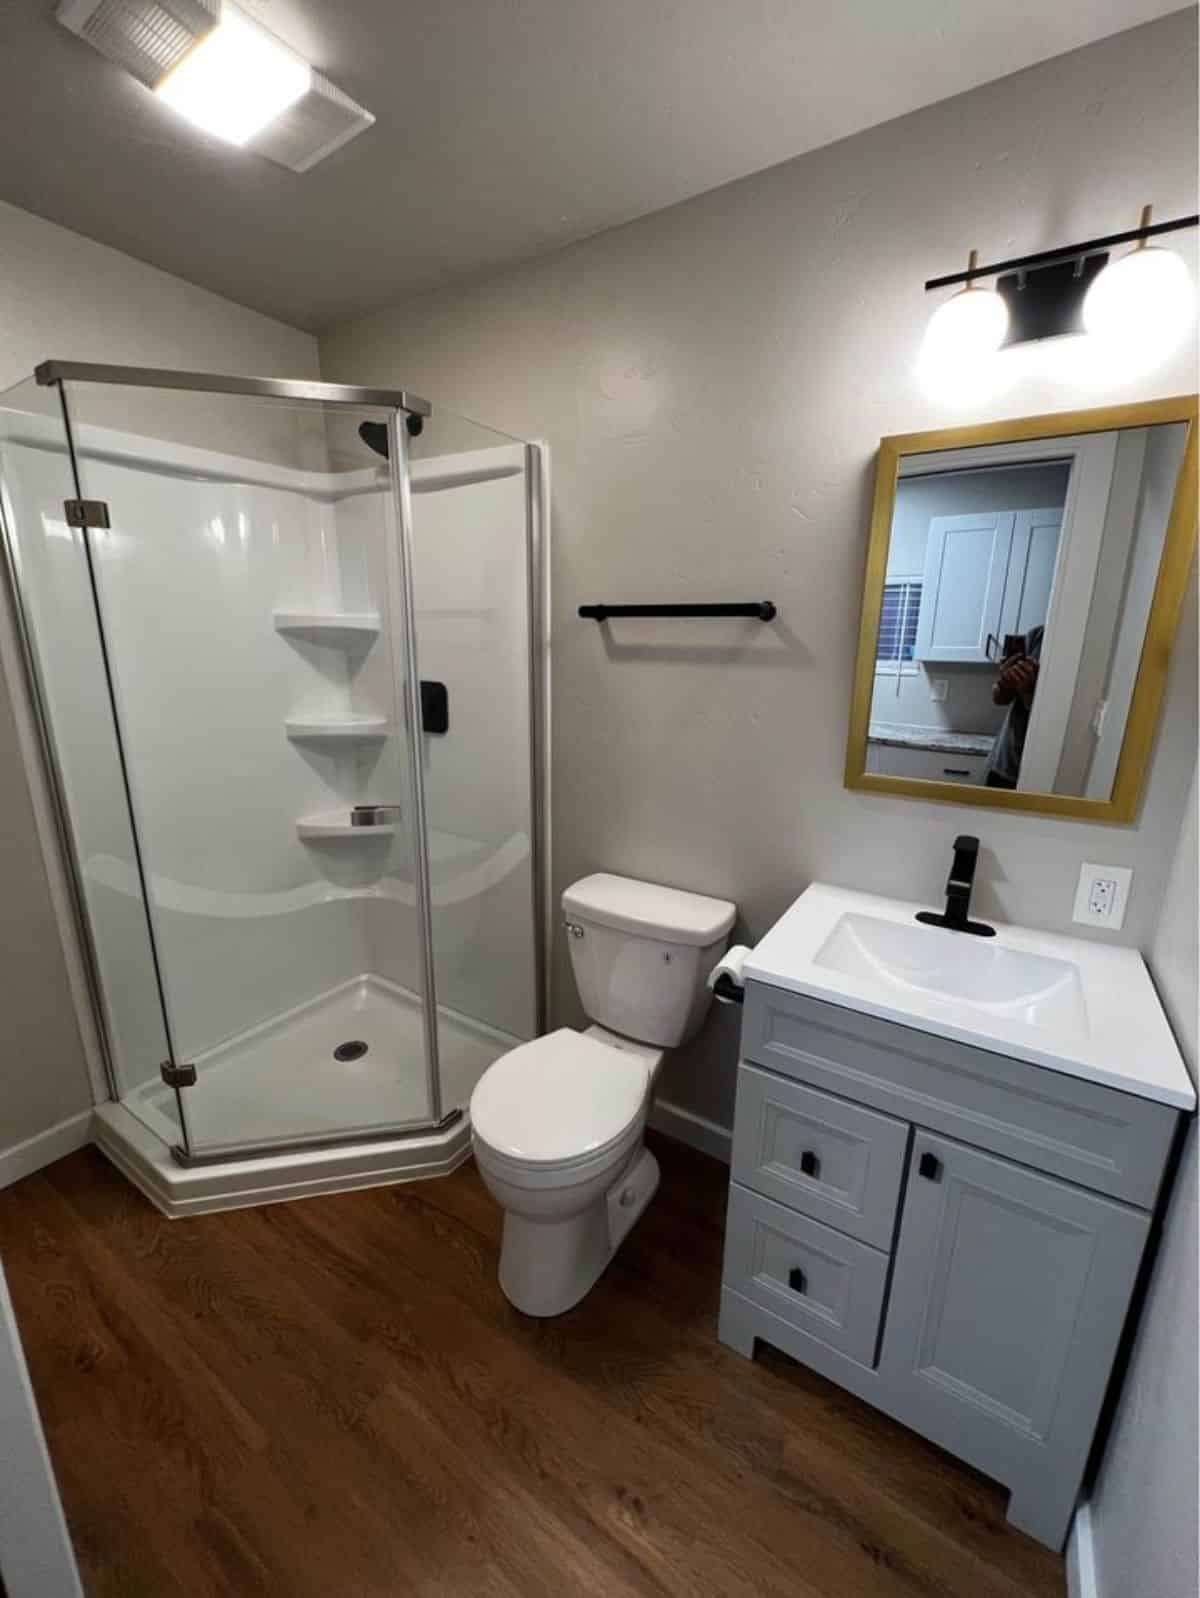 Bathroom of Brand-New Tiny Home has a standard toilet, sink with vanity & mirror and glass door separate shower area